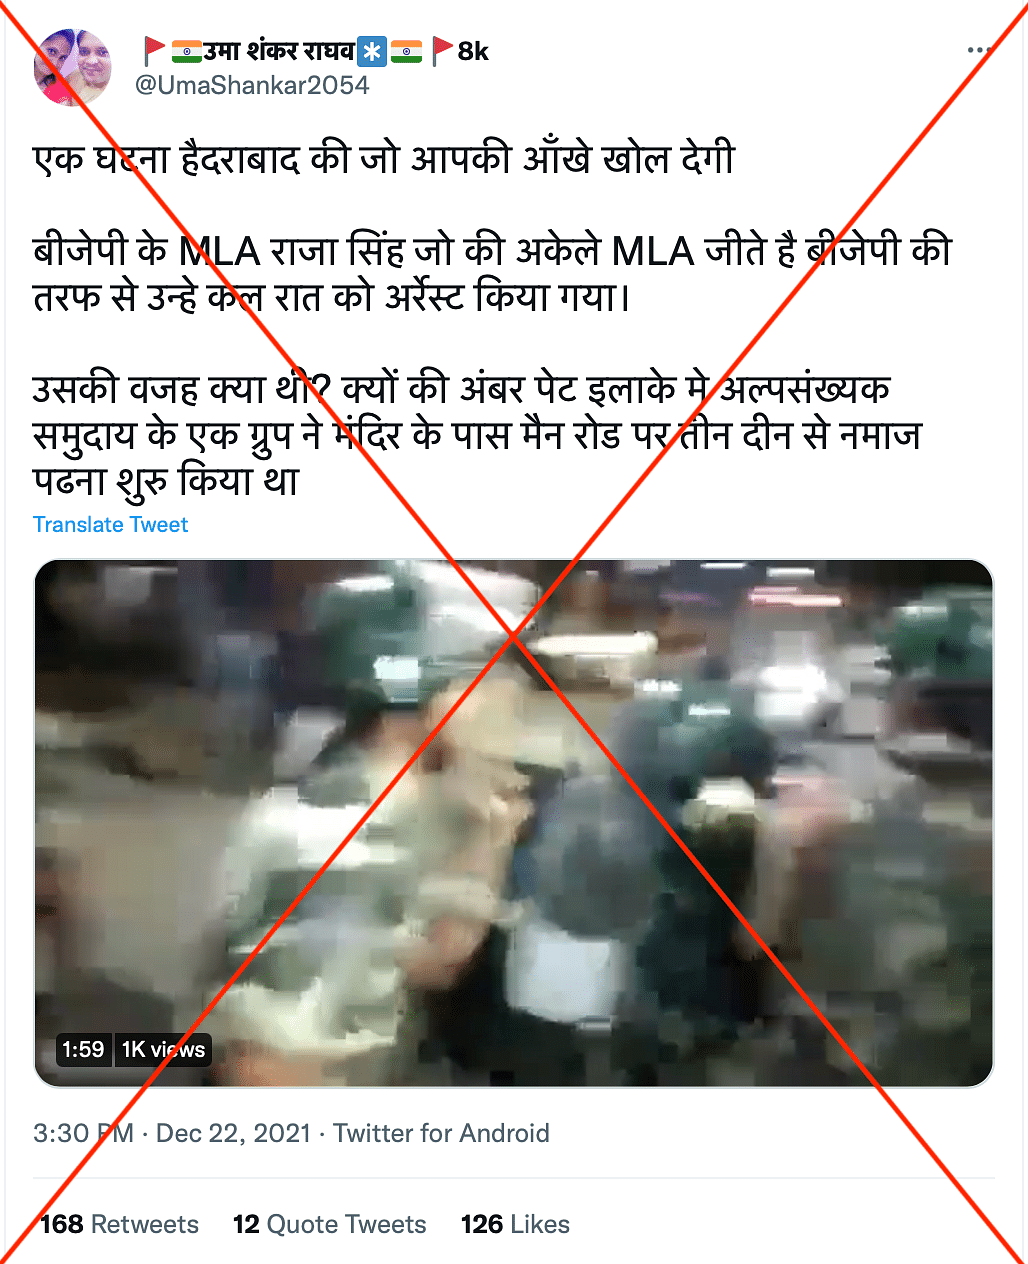 The clip showing Hyderabad Police arresting BJP MLA Raja Singh is from May 2019, and is not recent as claimed.